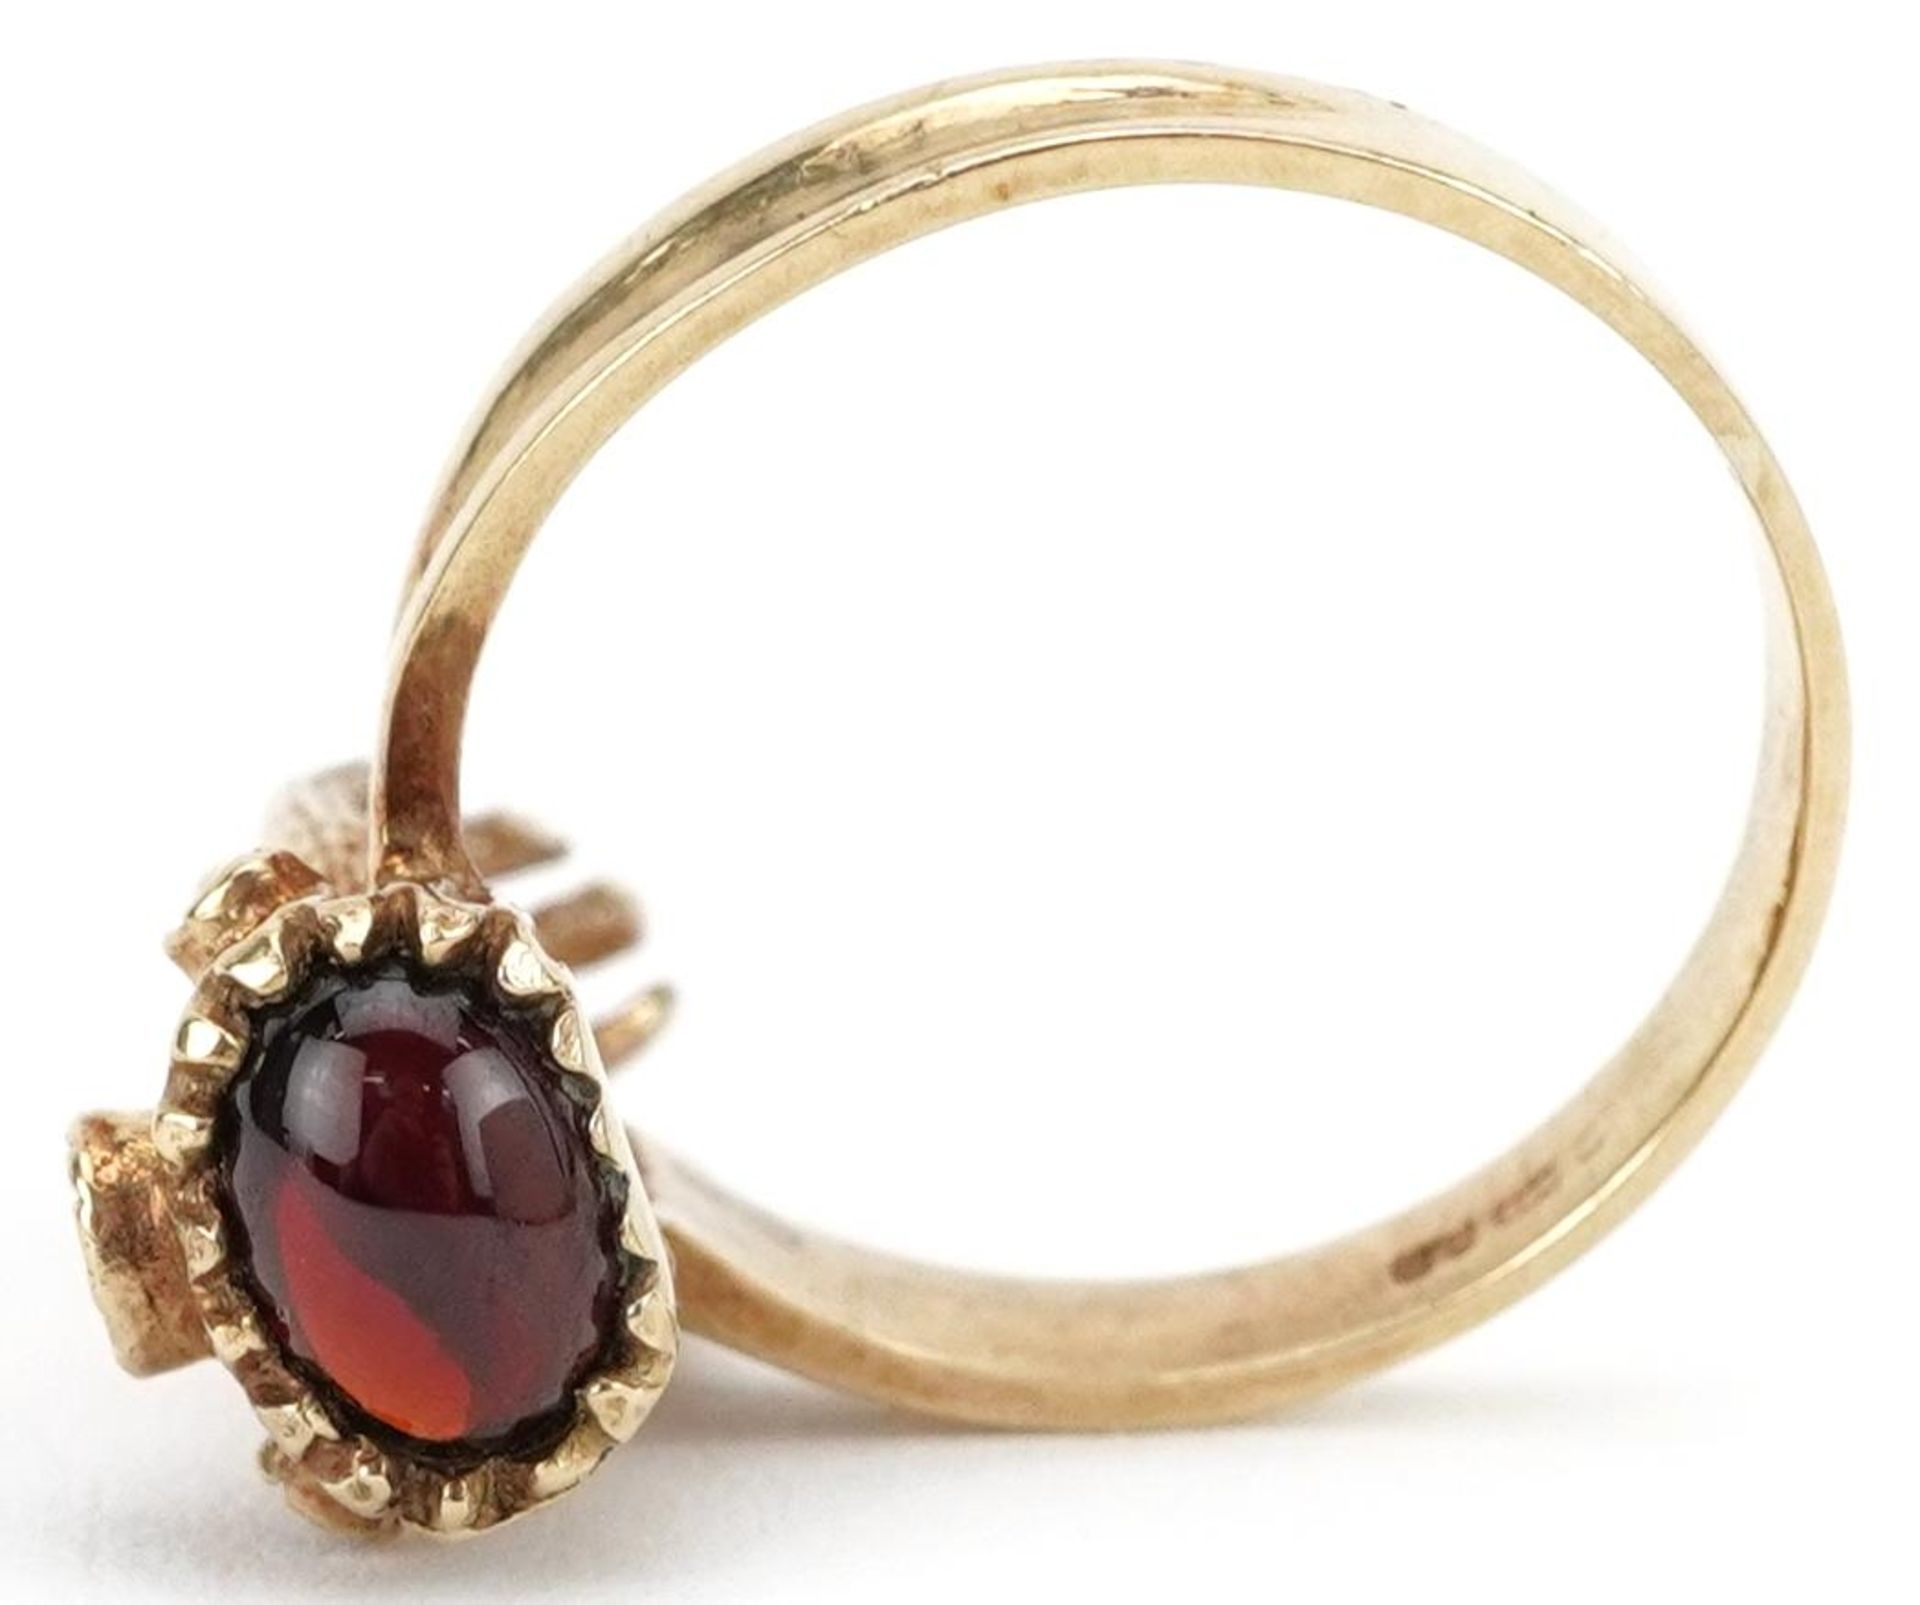 9ct gold female's hand ring set with a cabochon garnet, opal and rubies, size N, 4.5g : For - Image 3 of 5